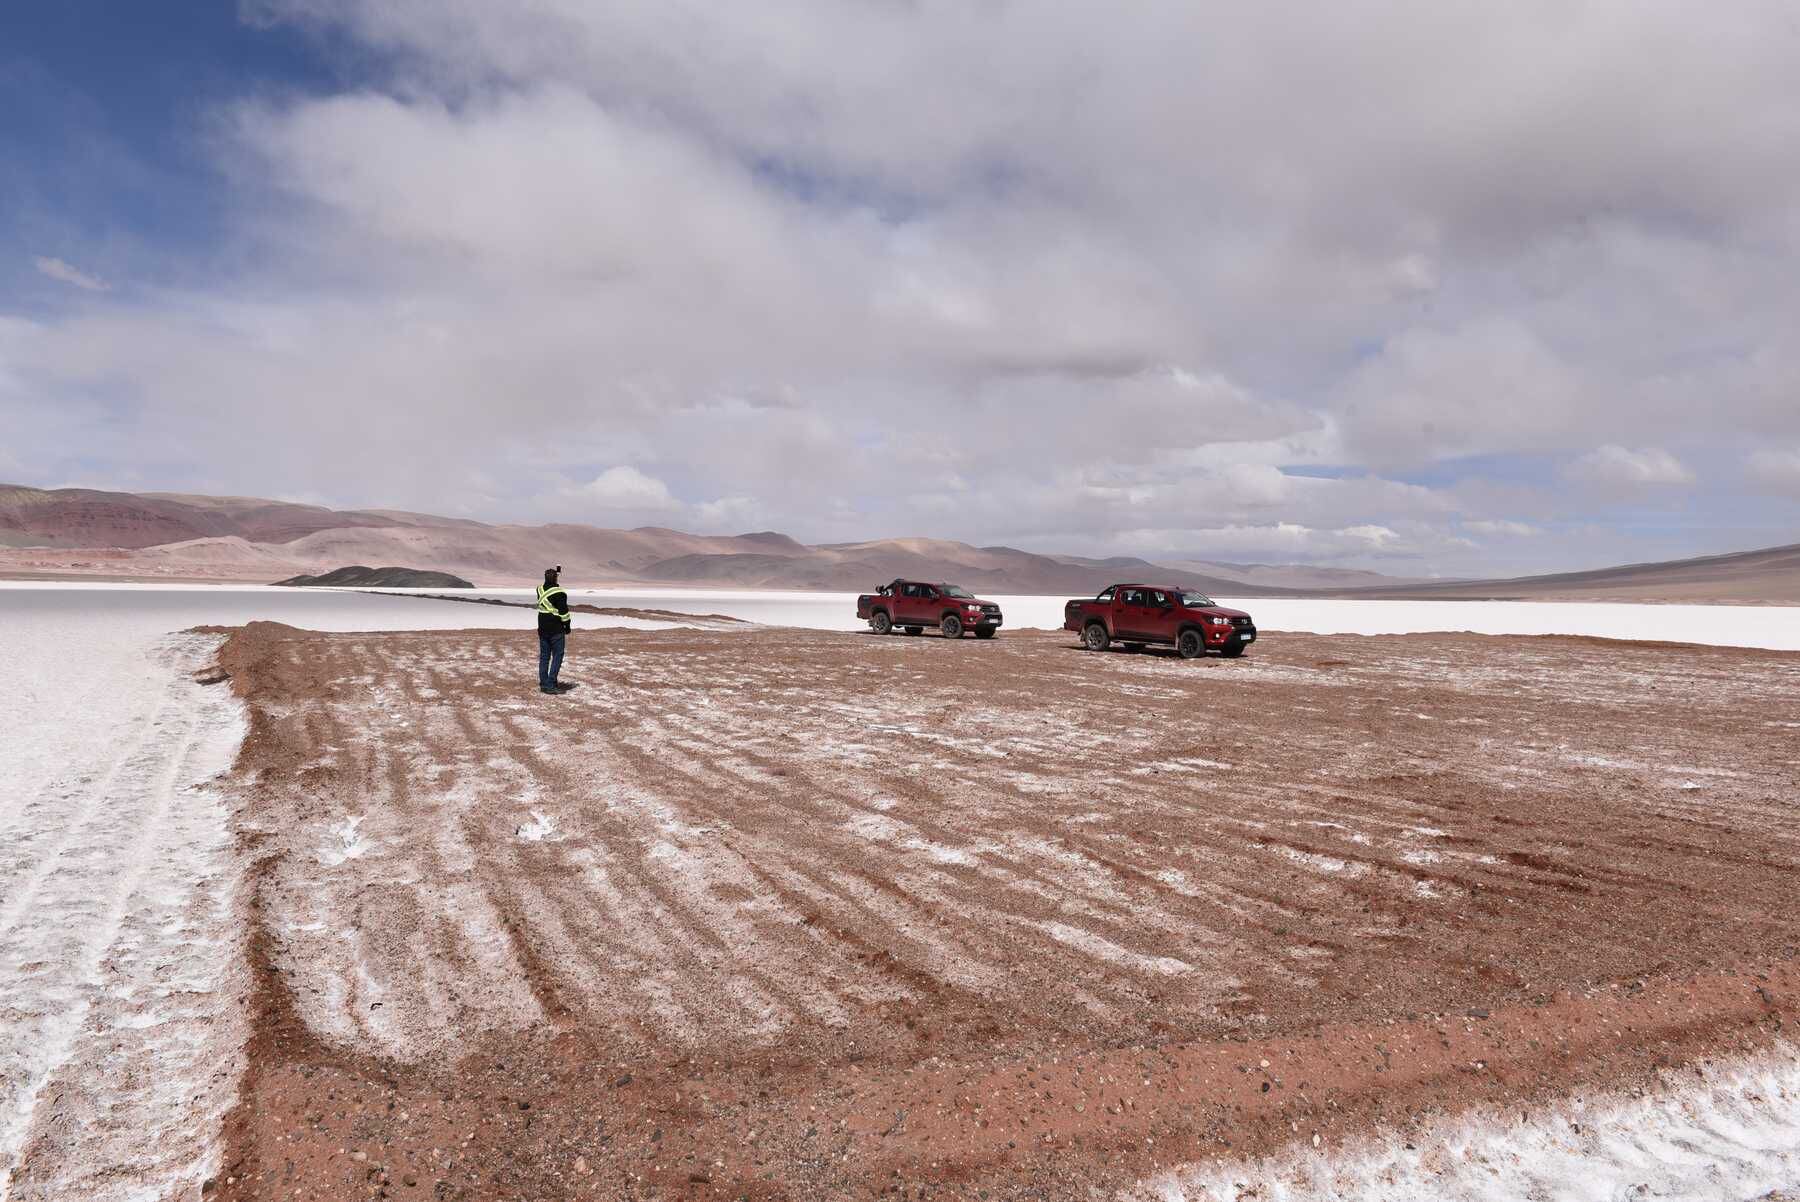 Eramet will invest US$ 400 million in a lithium project in Argentina